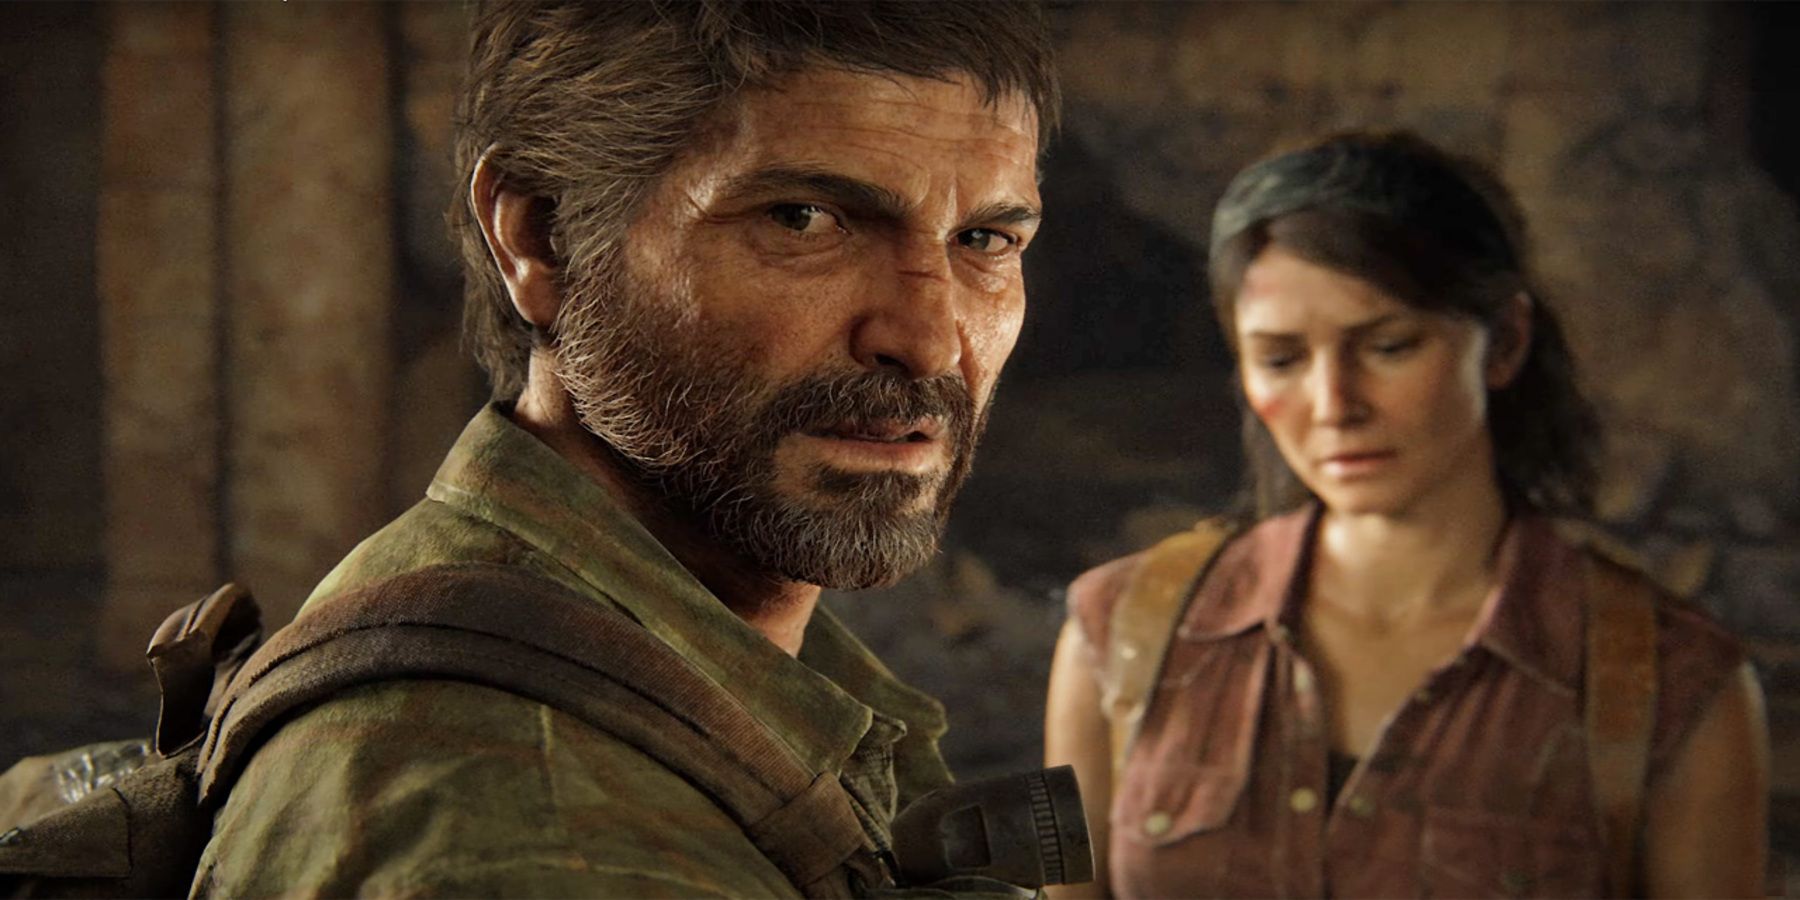 The Last of Us PC Port to Release “Very Soon” After PS5 Debut